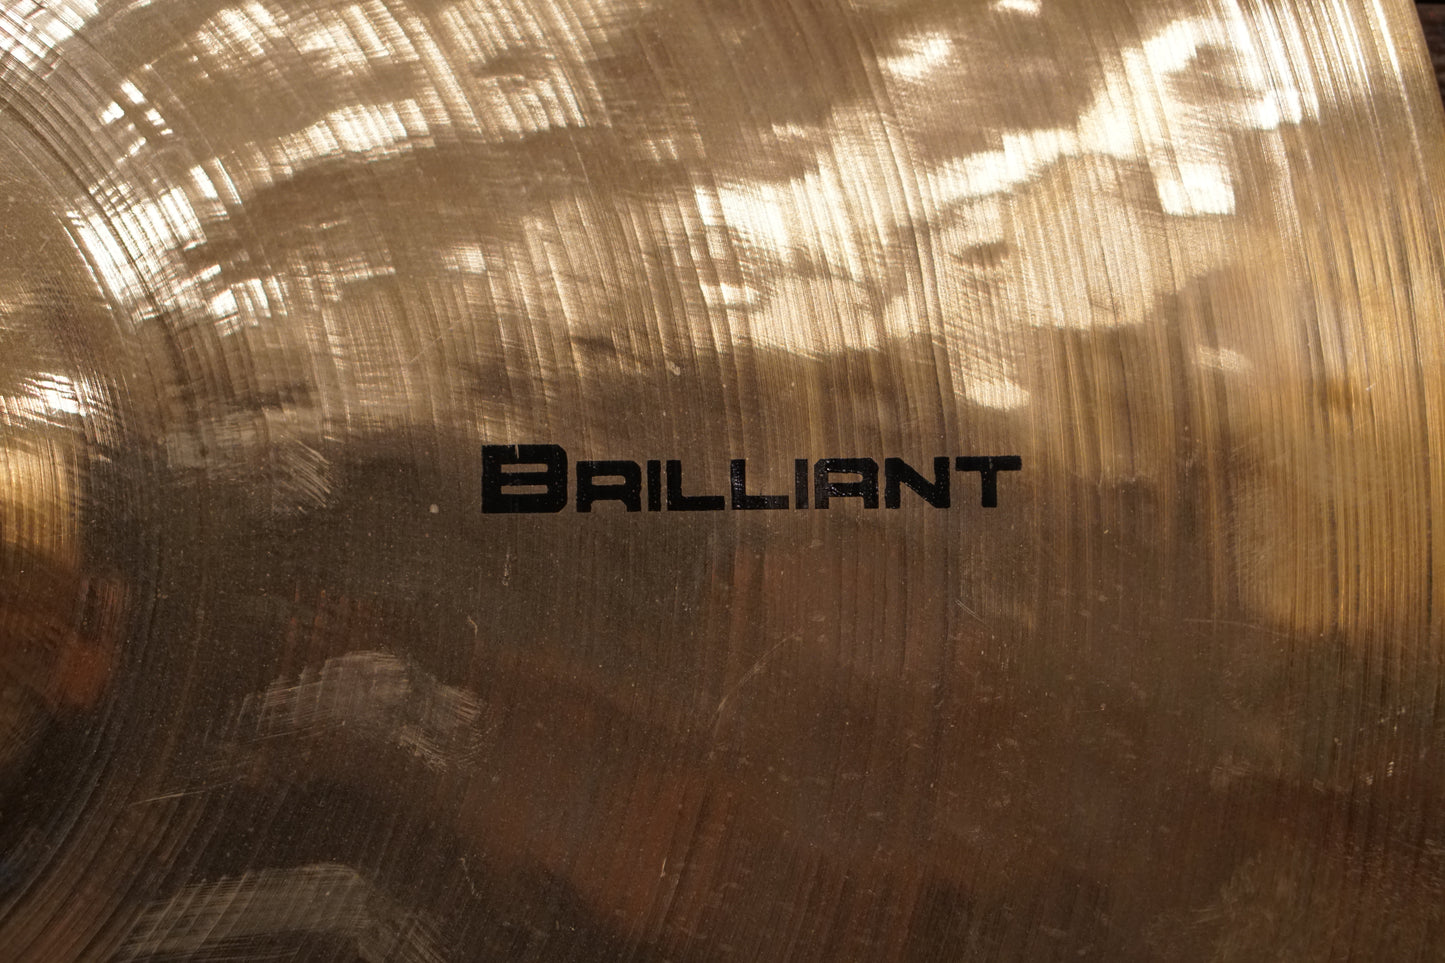 UFIP 22" Class Series Brilliant Ride Cymbal - 2744g